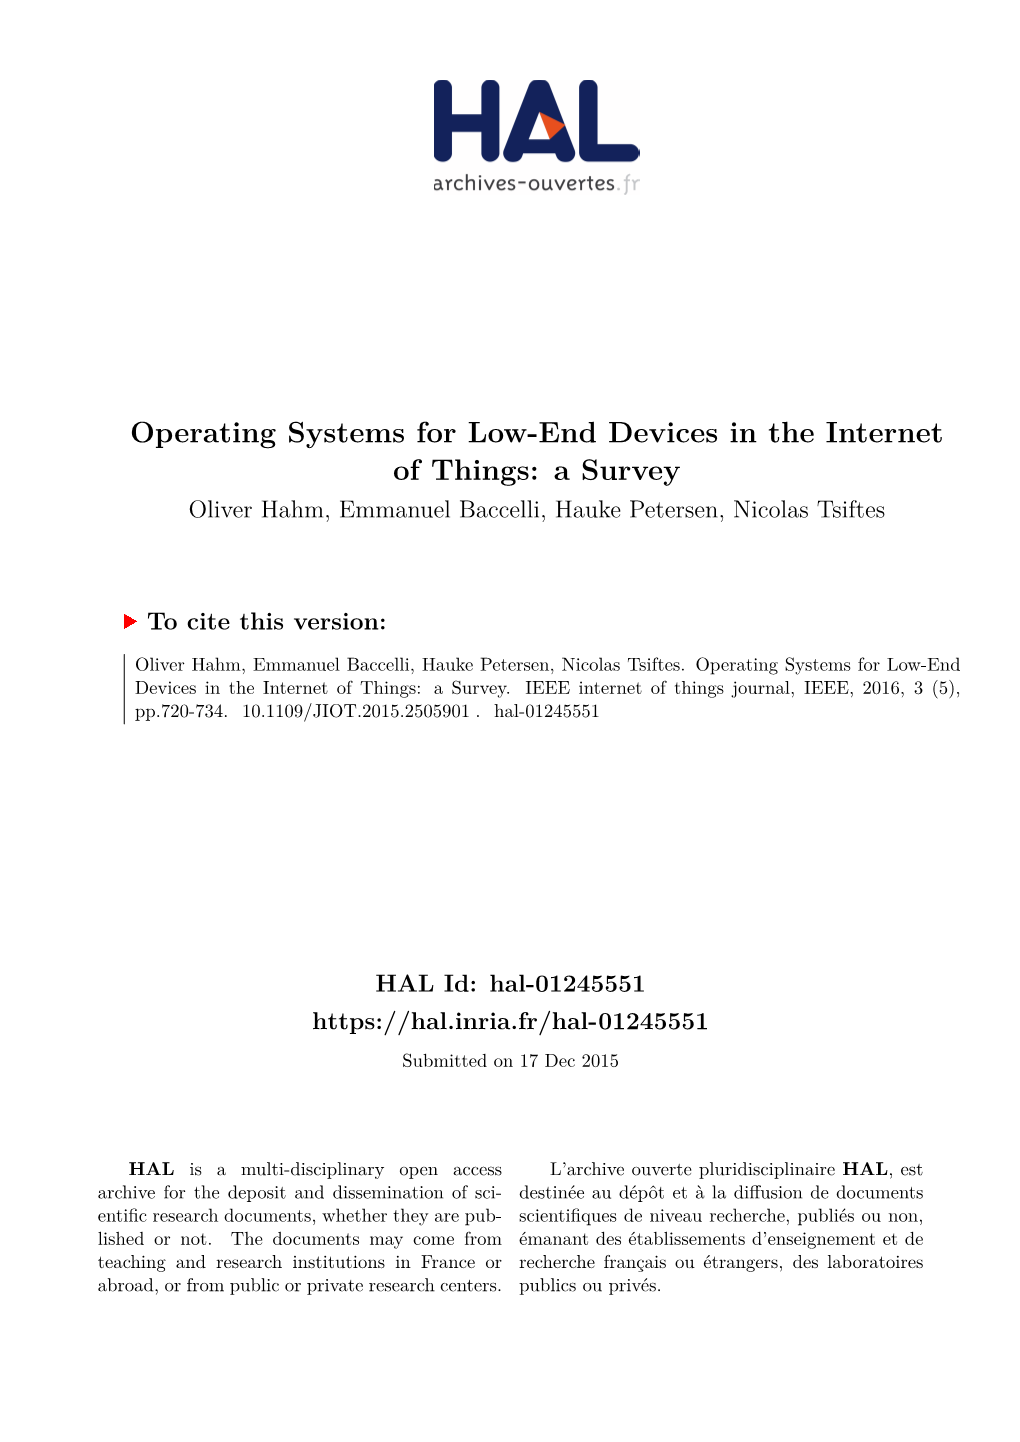 Operating Systems for Low-End Devices in the Internet of Things: a Survey Oliver Hahm, Emmanuel Baccelli, Hauke Petersen, Nicolas Tsiftes